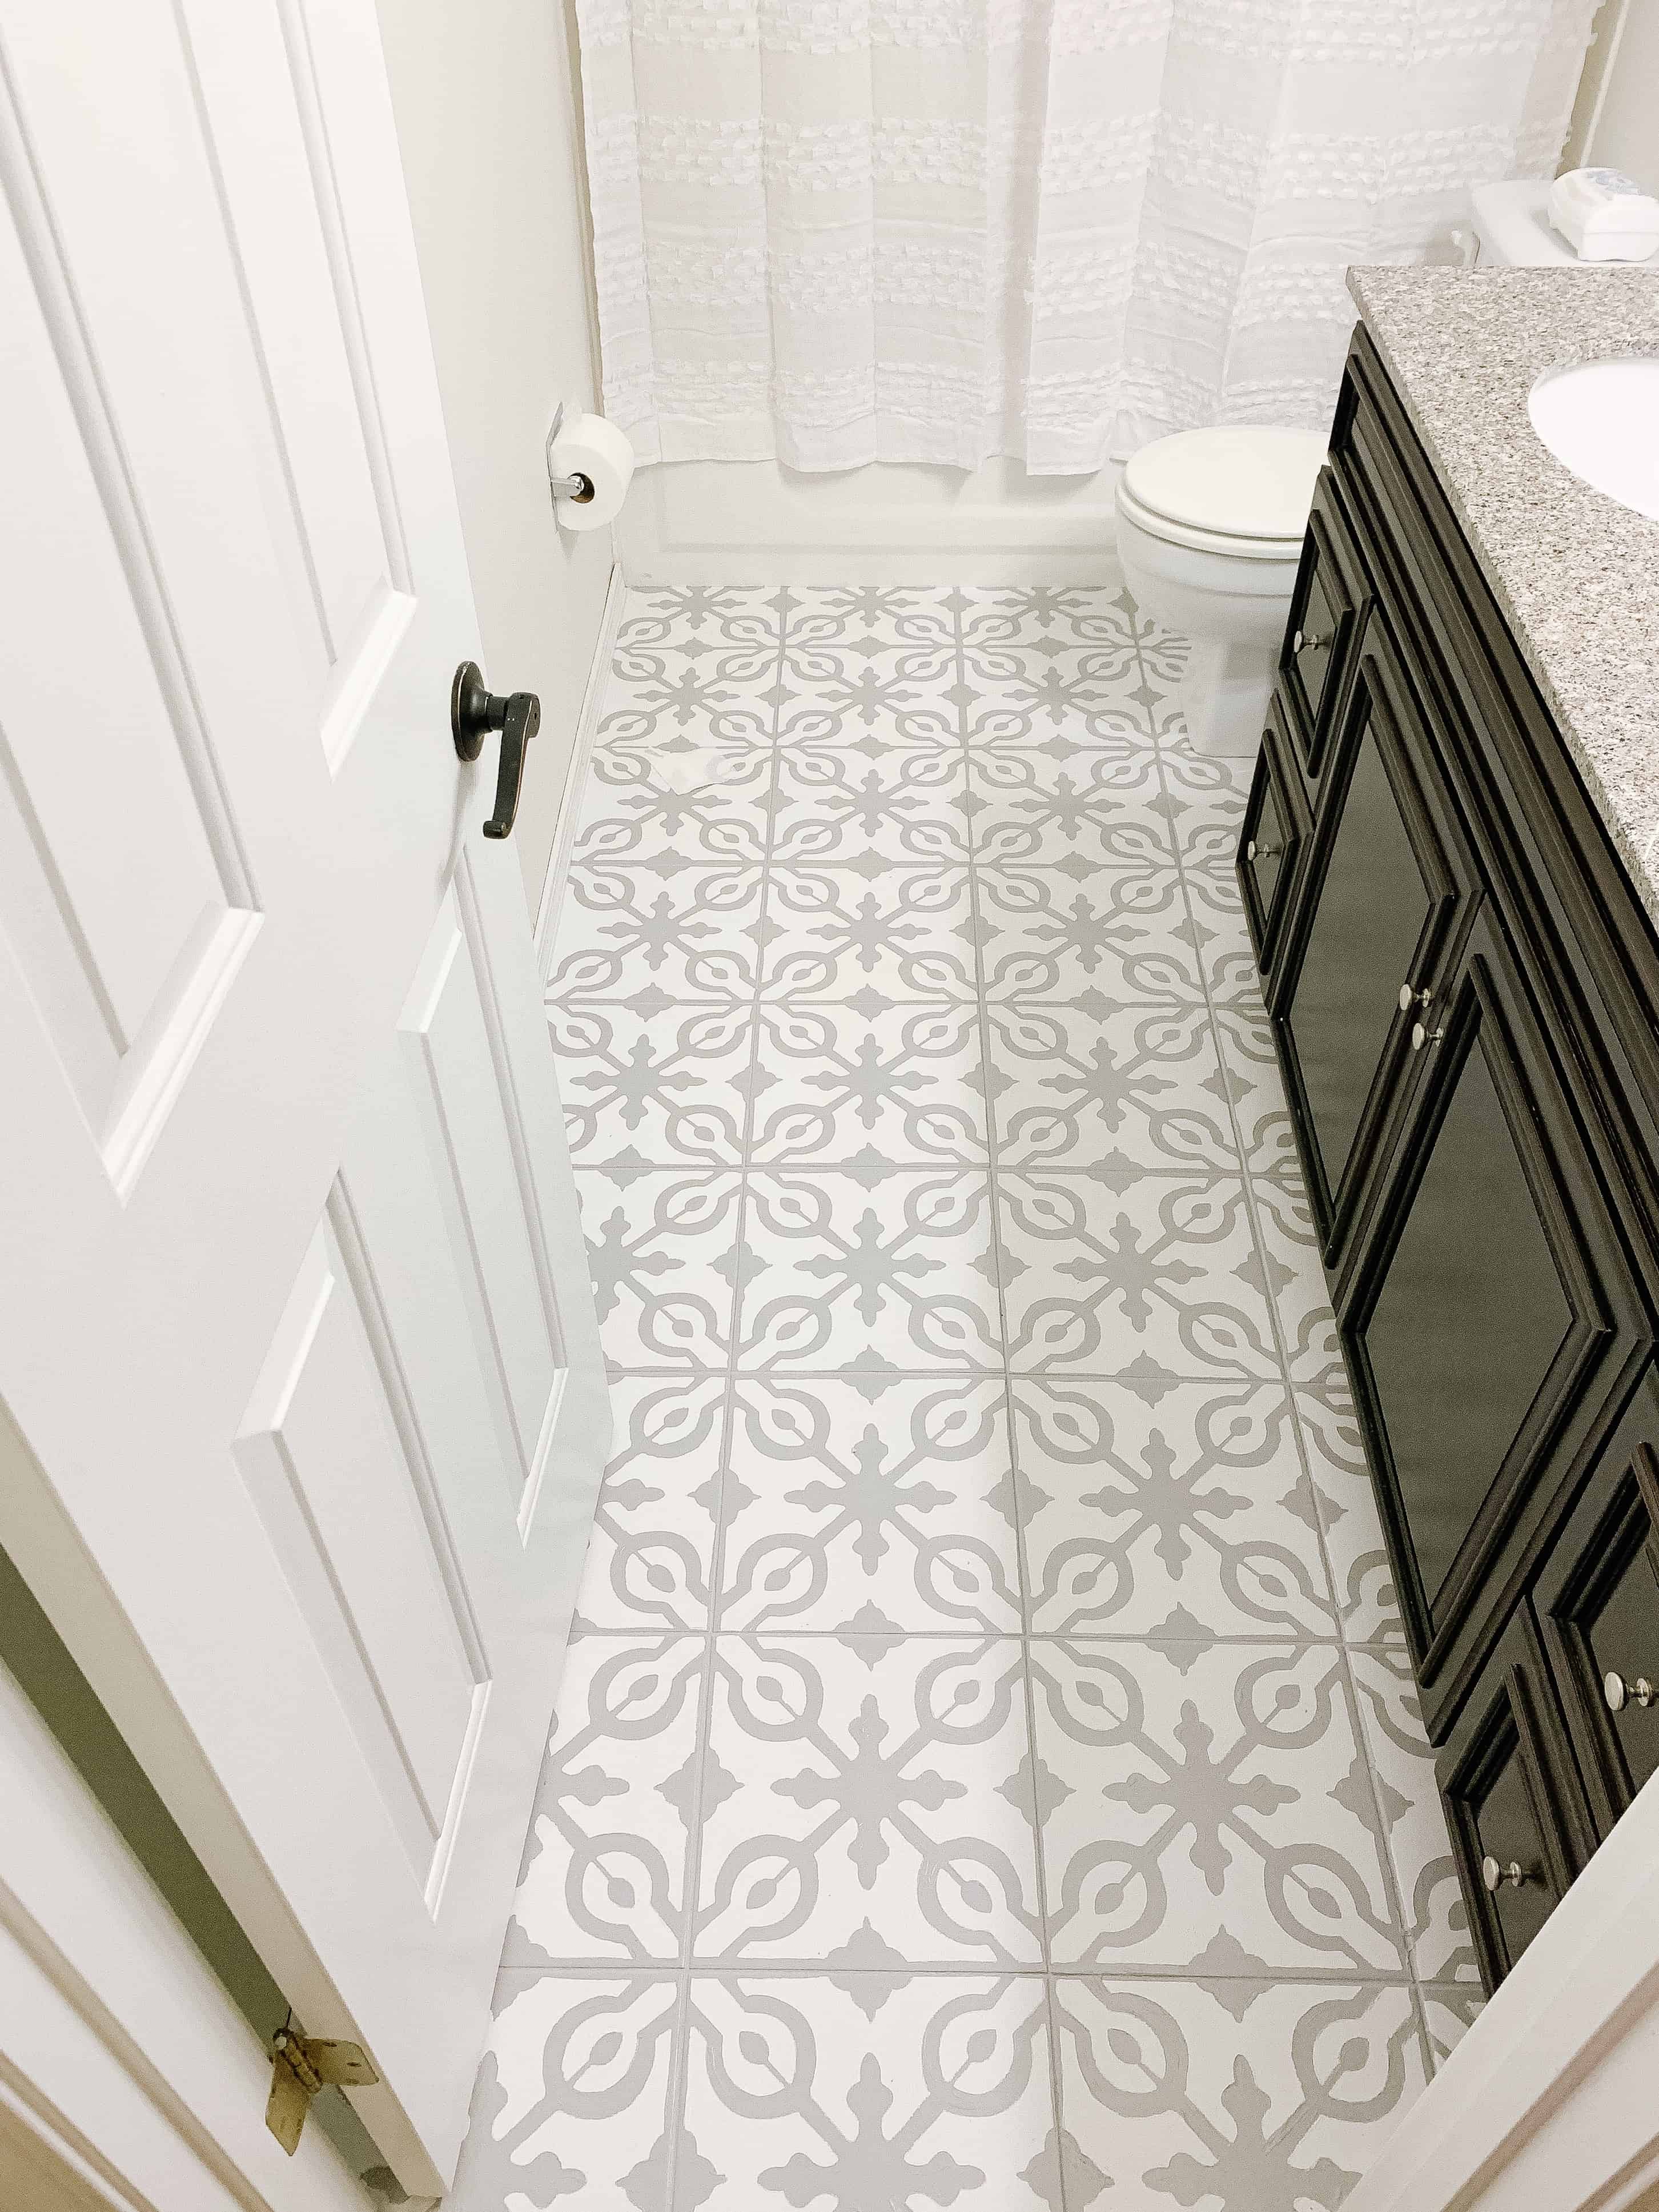 How To Paint Tile Floors, Is There A Paint For Tile Floors